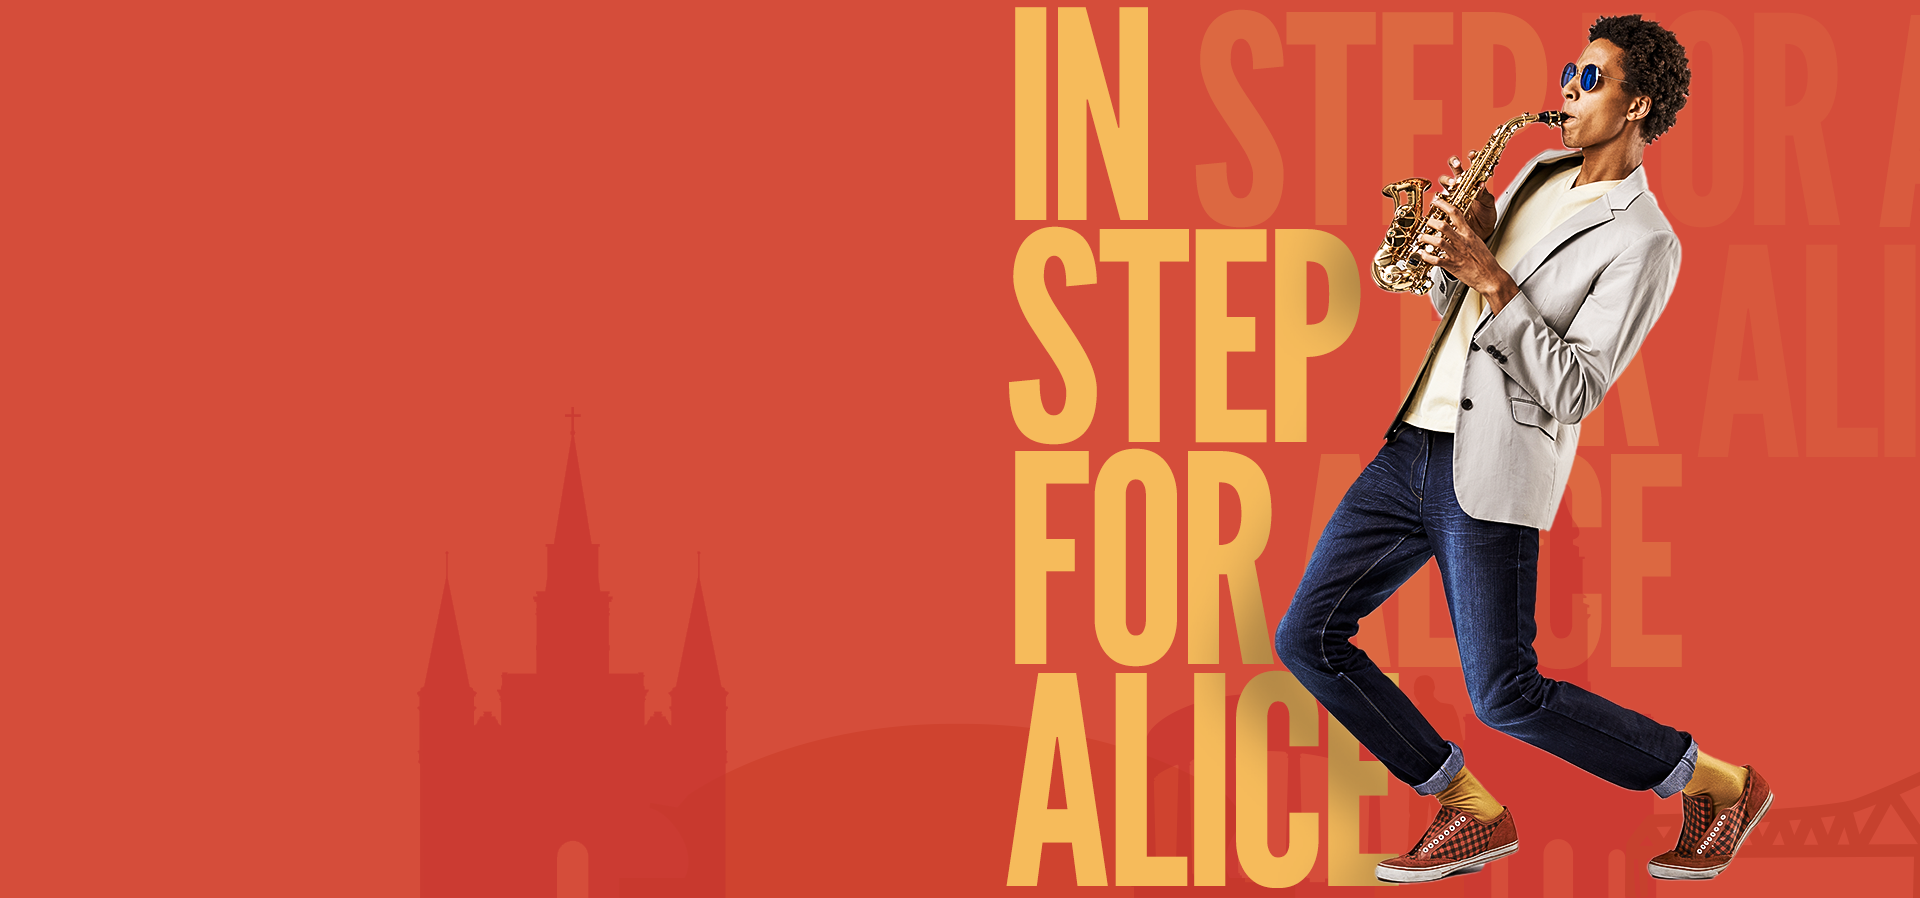 Jazz player in front of large gold text that reads IN STEP FOR ALICE, on a red background with notable New Orleans structures silhouetted on the bottom. 